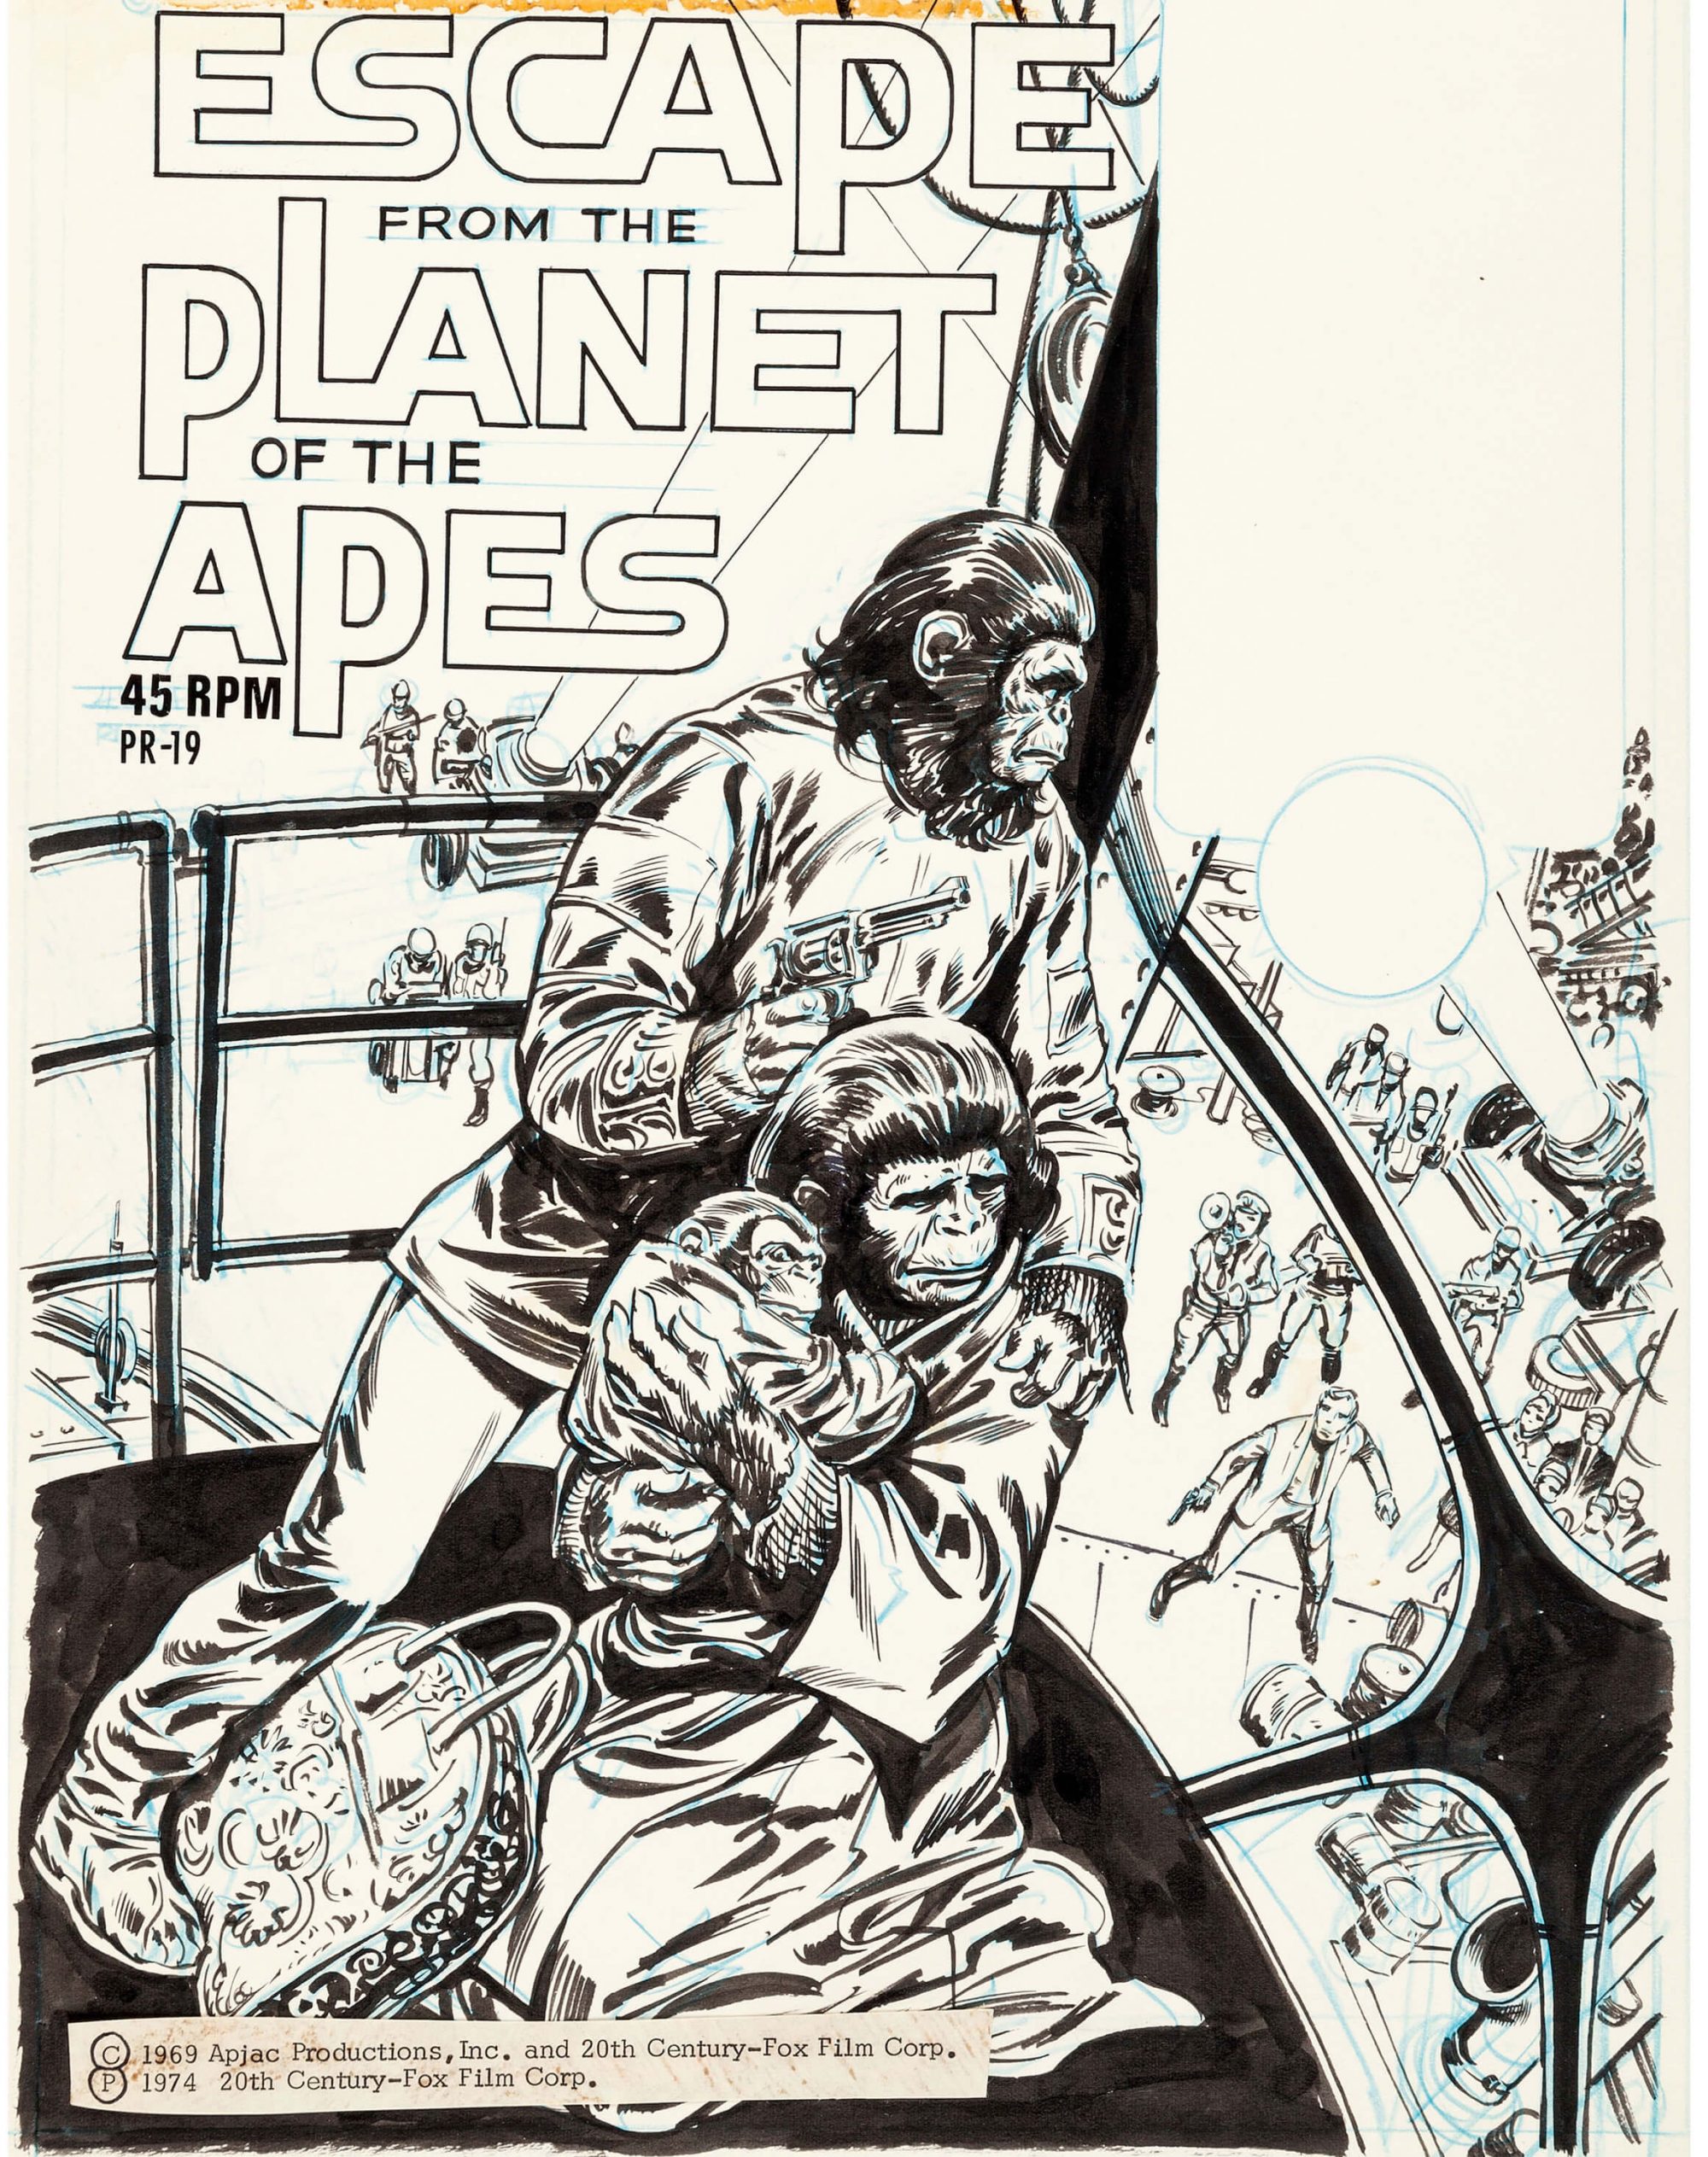 Escape From the Planet of the Apes book and record cover